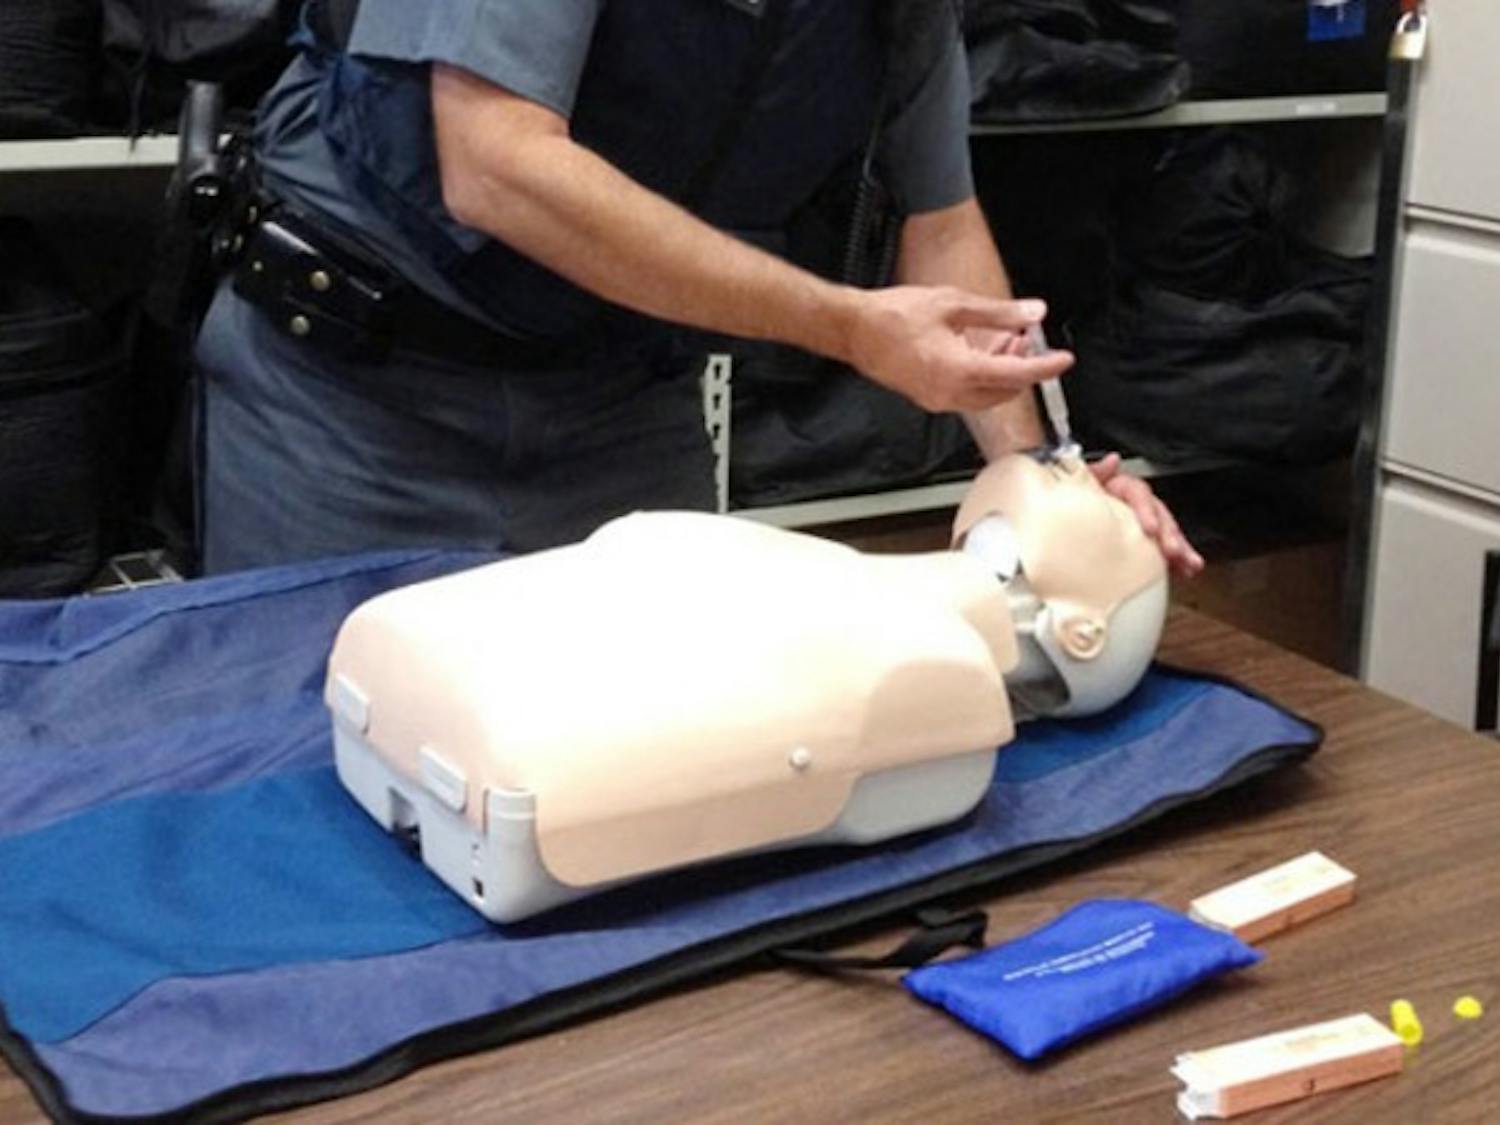 University Police Lt. David Urbanek demonstrates
the nasal administrationof a&nbsp;heroin antidote. Antidote kits have
been recently&nbsp;supplied to&nbsp;12 SUNY&nbsp;campuses as&nbsp;heroin-related deaths
increase across New&nbsp;York State.
Athita Unni, The Spectrum